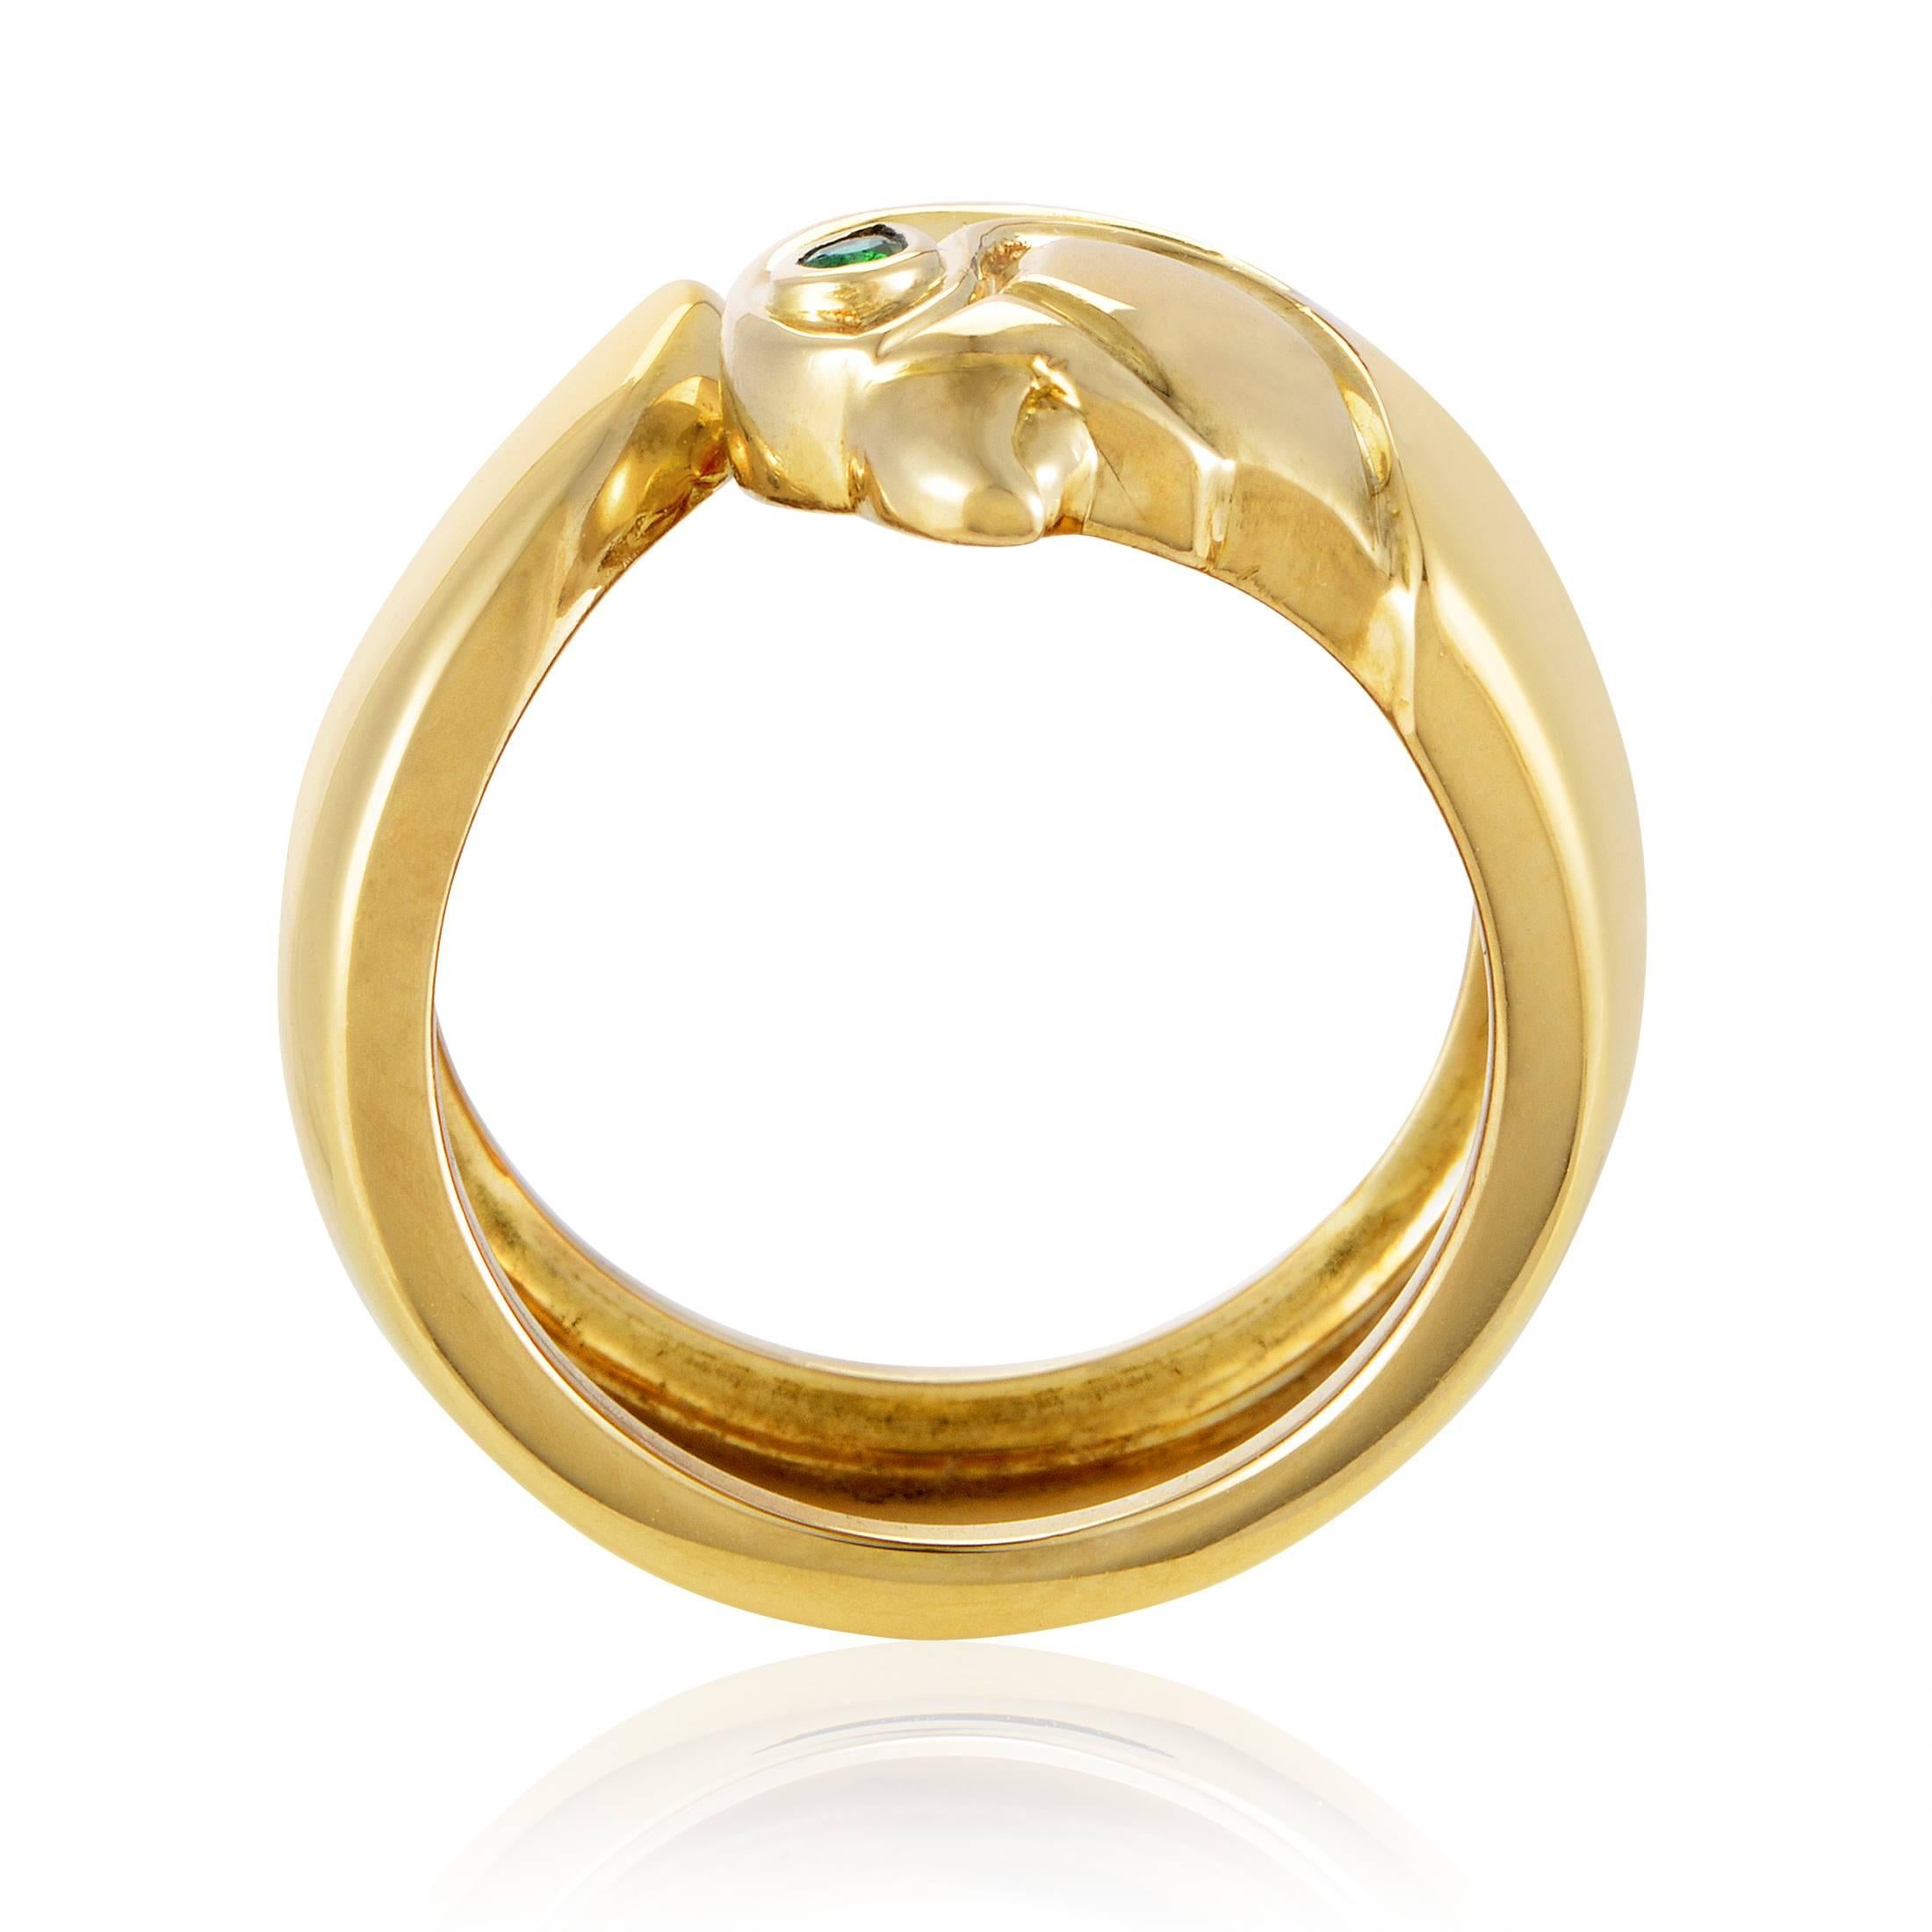 Cartier creations always boasts a unique air of regality that i is without comparison. The ring is made of 18K yellow gold and is shaped like a bird with an emerald-set eye.
Ring Size: 6.5(52)
Ring Top Dimensions: 18 x 15mm
Band Thickness: 13